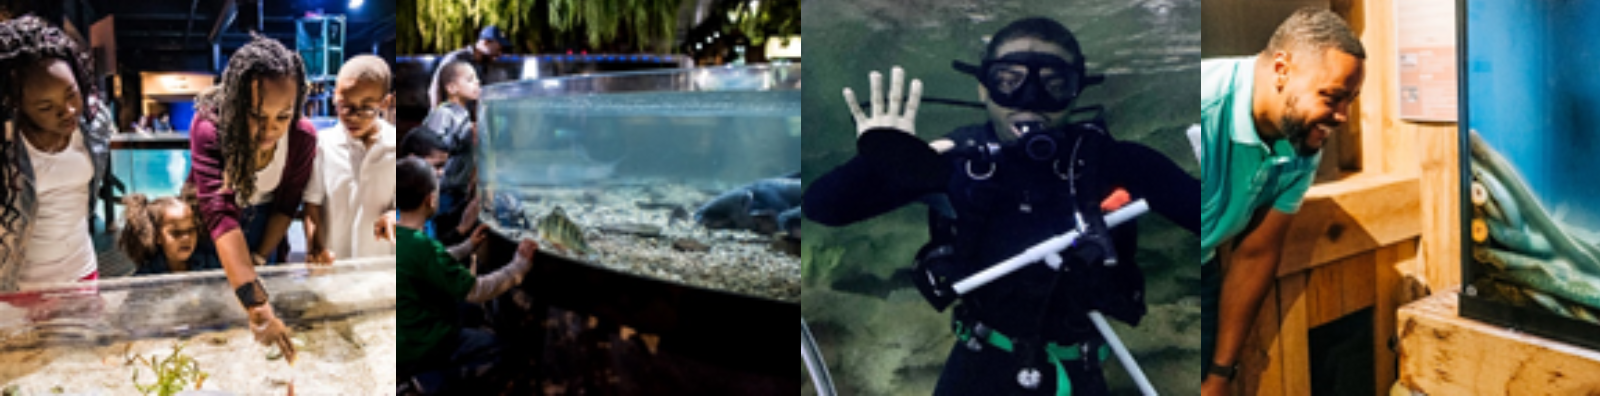 Difference-MakerDays-Greater Cleveland-Aquarium-Release